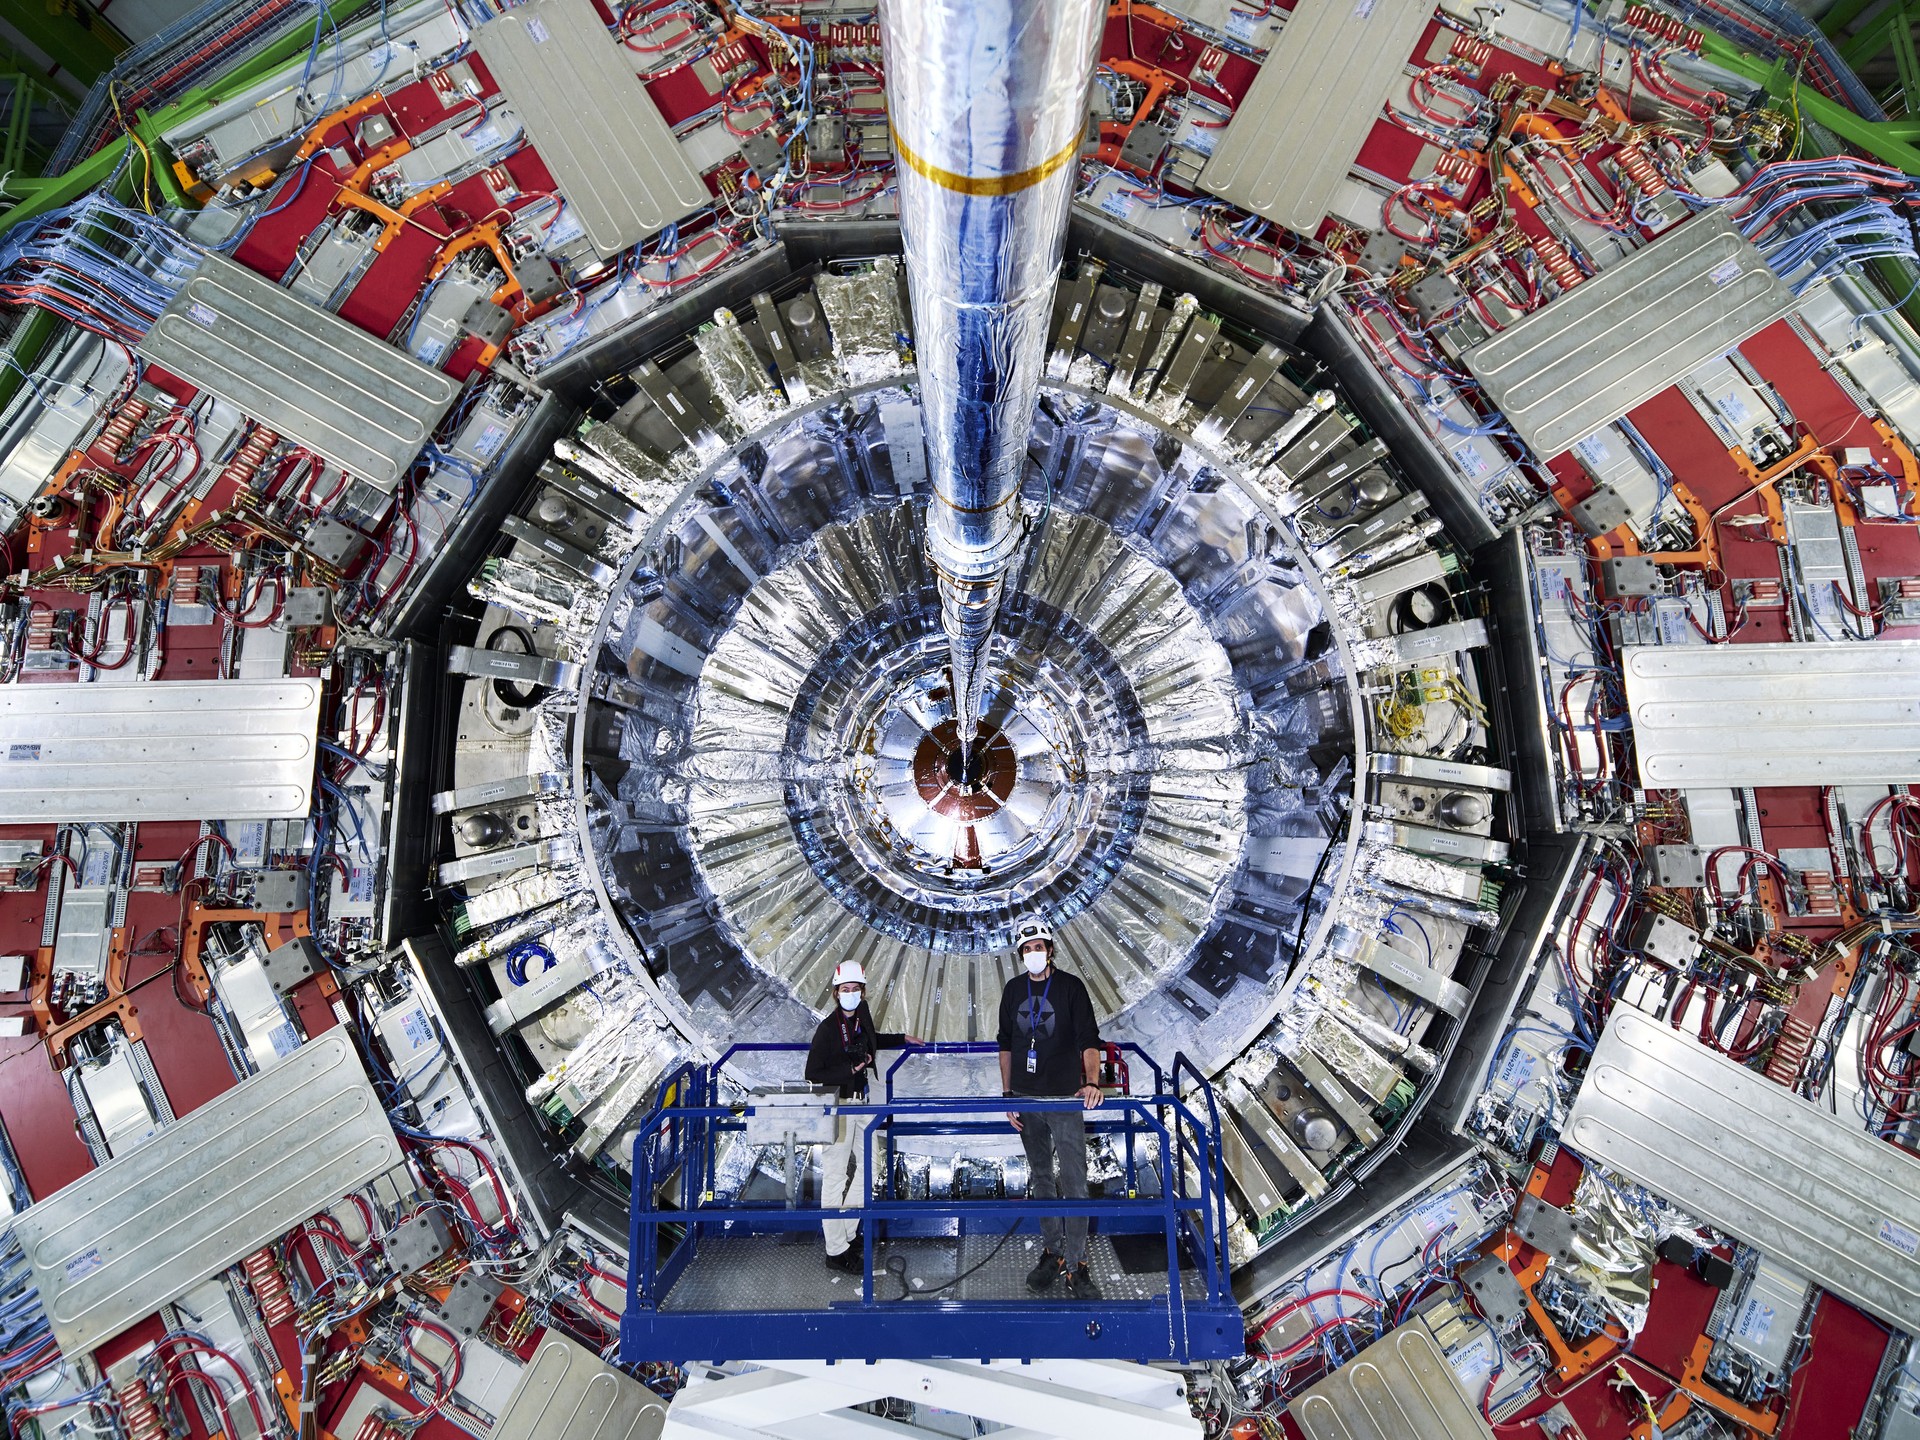 Large Hadron Collider (LHC) particle accelerator